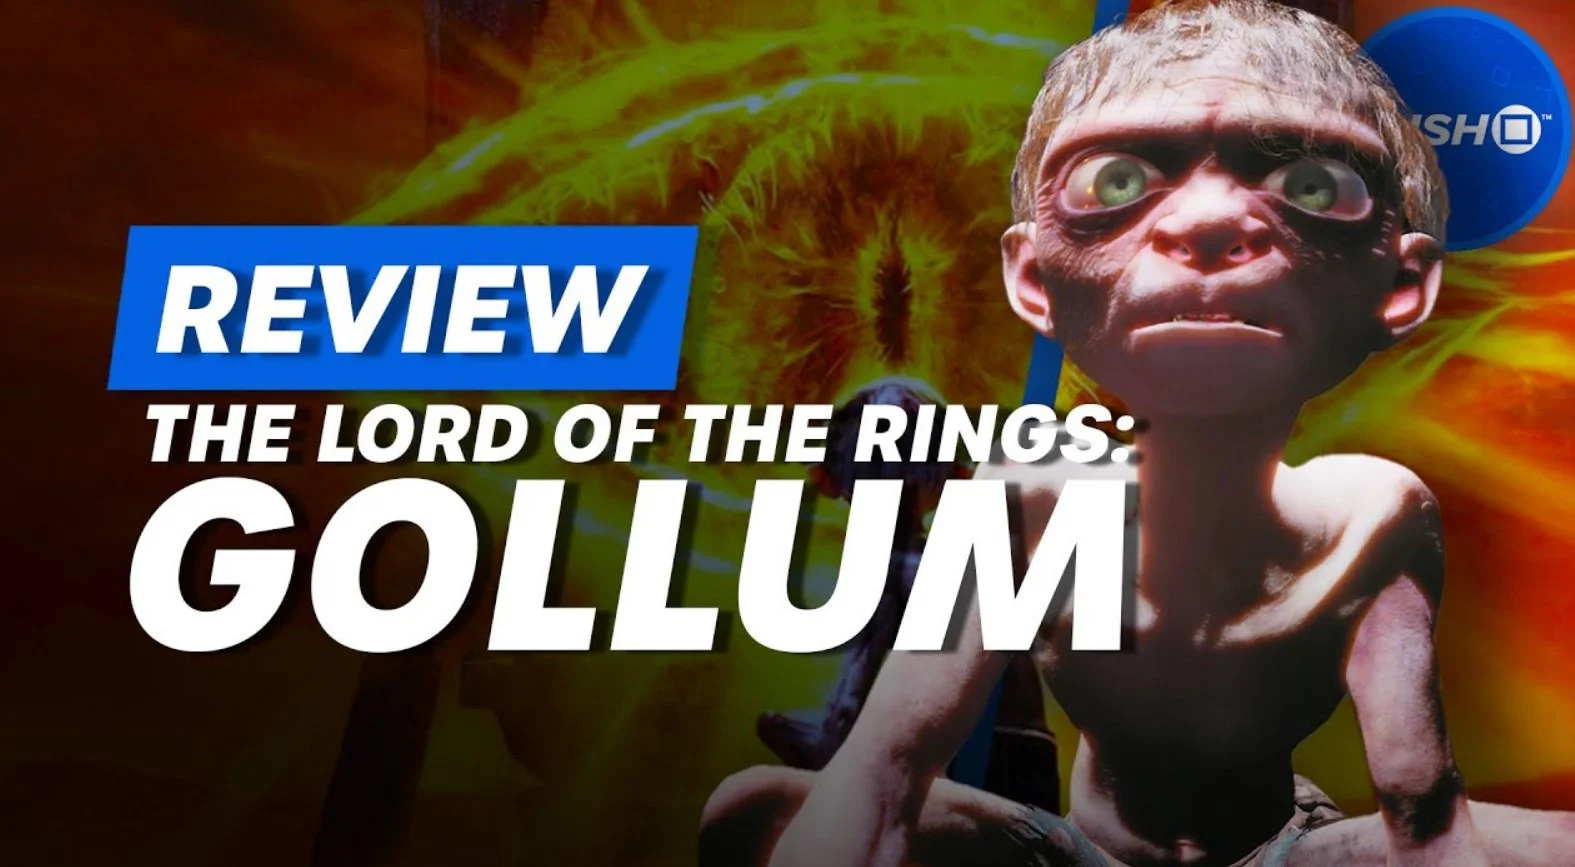 One of PS5's Worst Games Is The Lord of the Rings: Gollum - Geek Reply